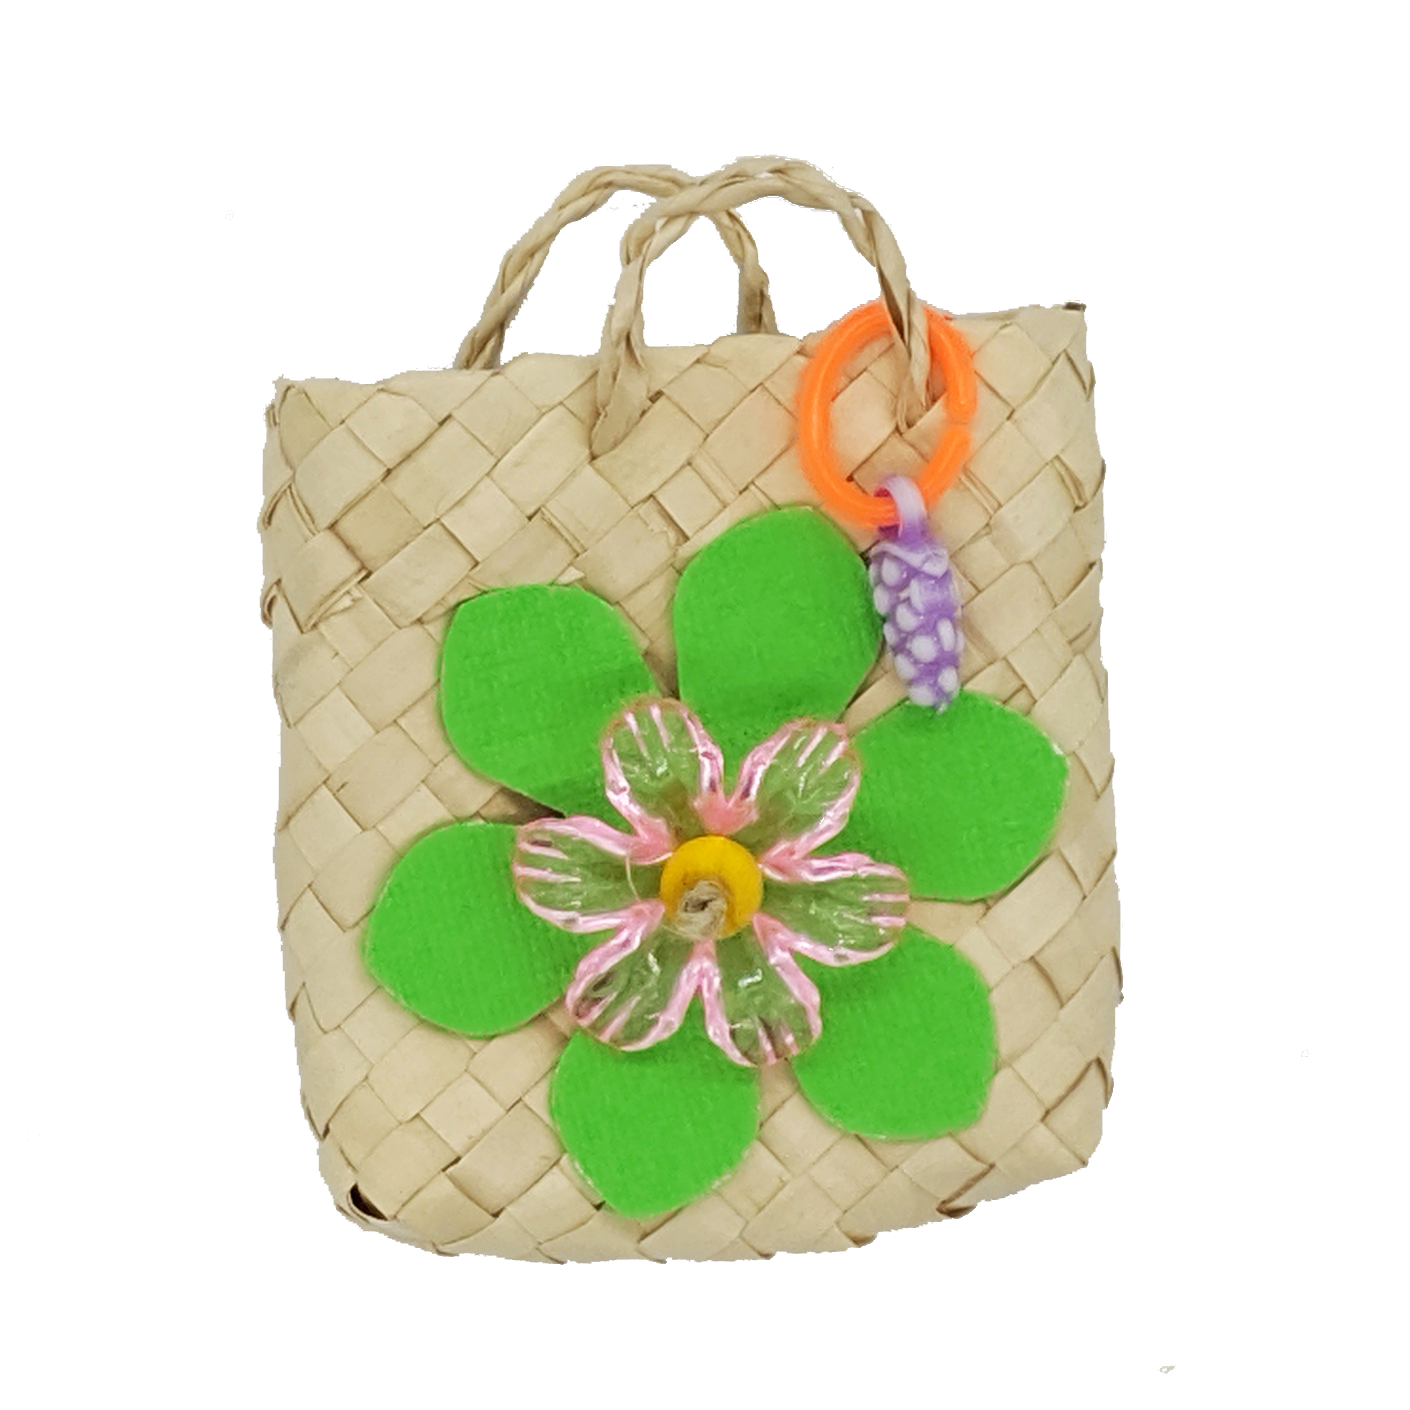 A woven palm bag with cardstock leaves, acrylic flower, and fruit charm. 